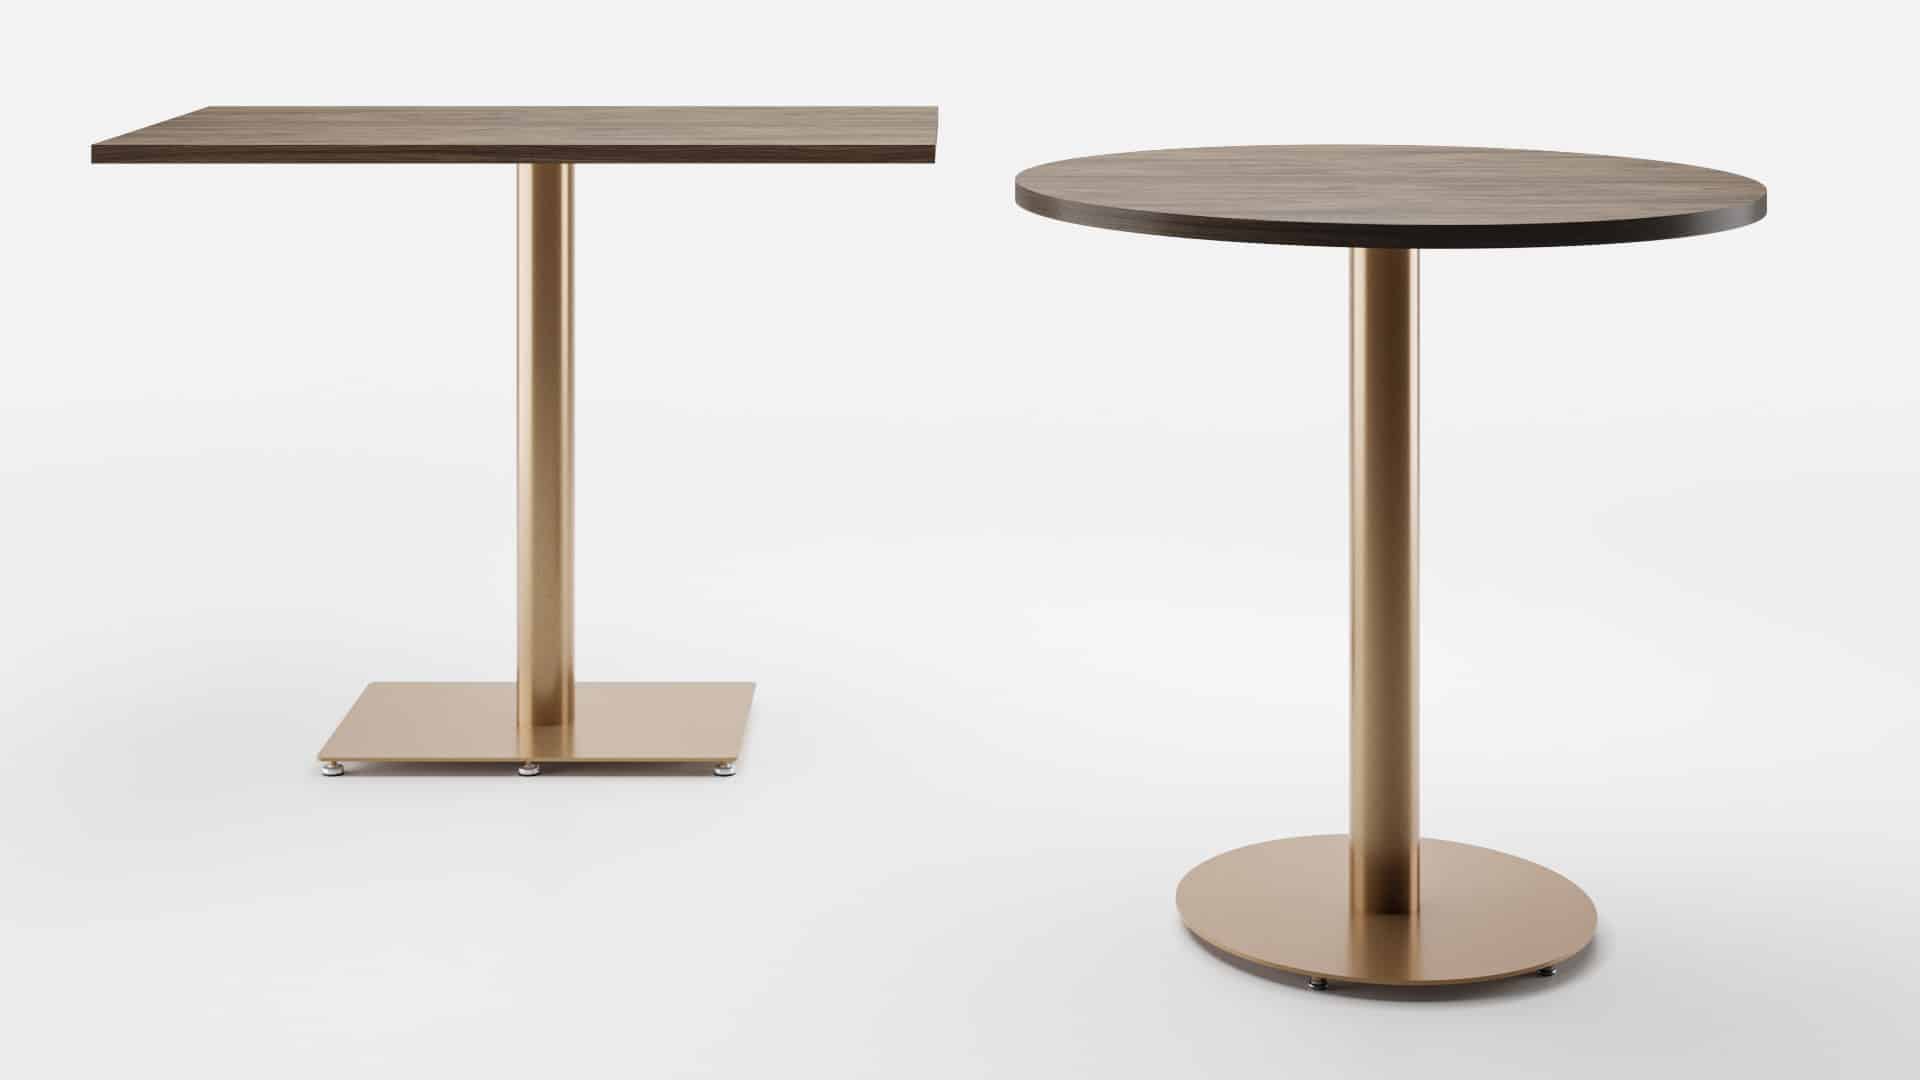 Island Table in bar height Finishes Shown: Caramel Latte | Neo Walnut